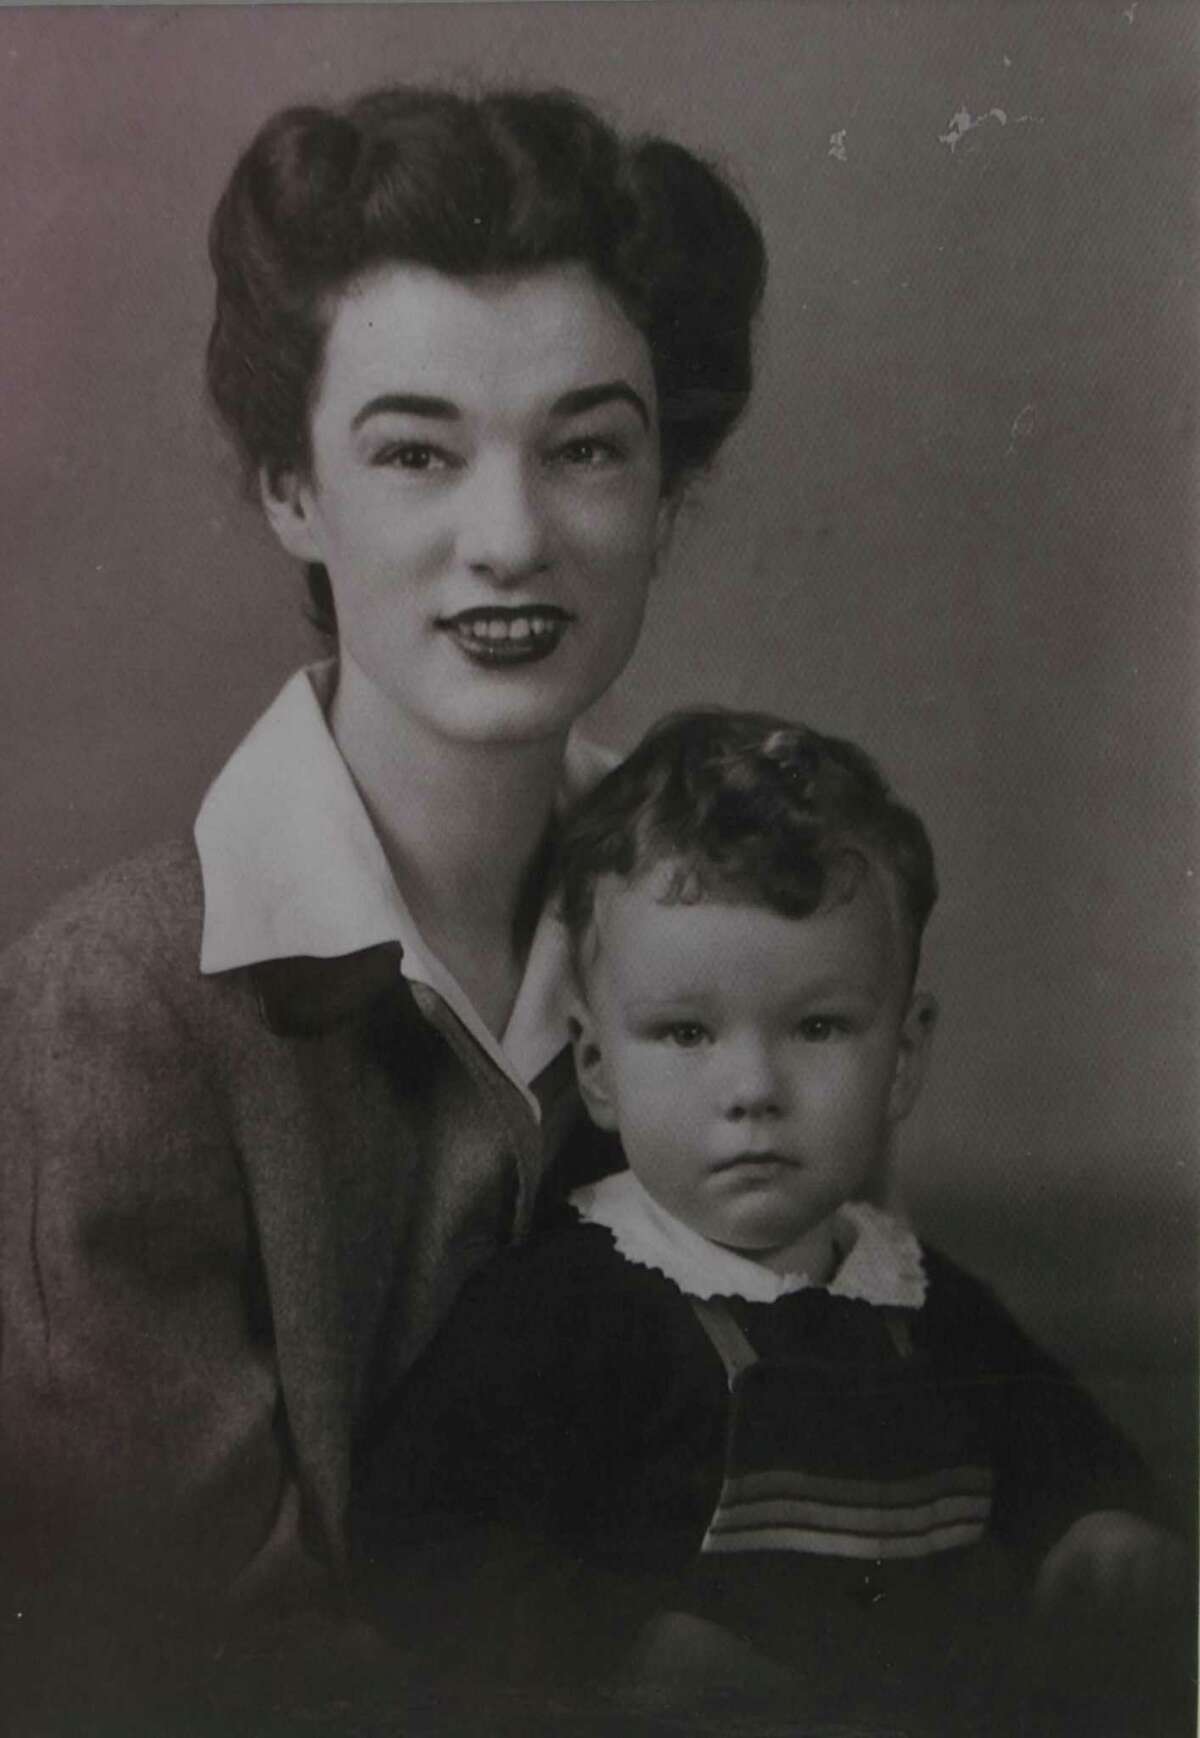 Rich Minus was born in San Antonio on Dec. 10, 1940. He's pictured in this undated photograph with his mother, Julie Lynk Minus. His father, William Slaughter Minus, was a nephew of Texas Ranger John Slaughter.